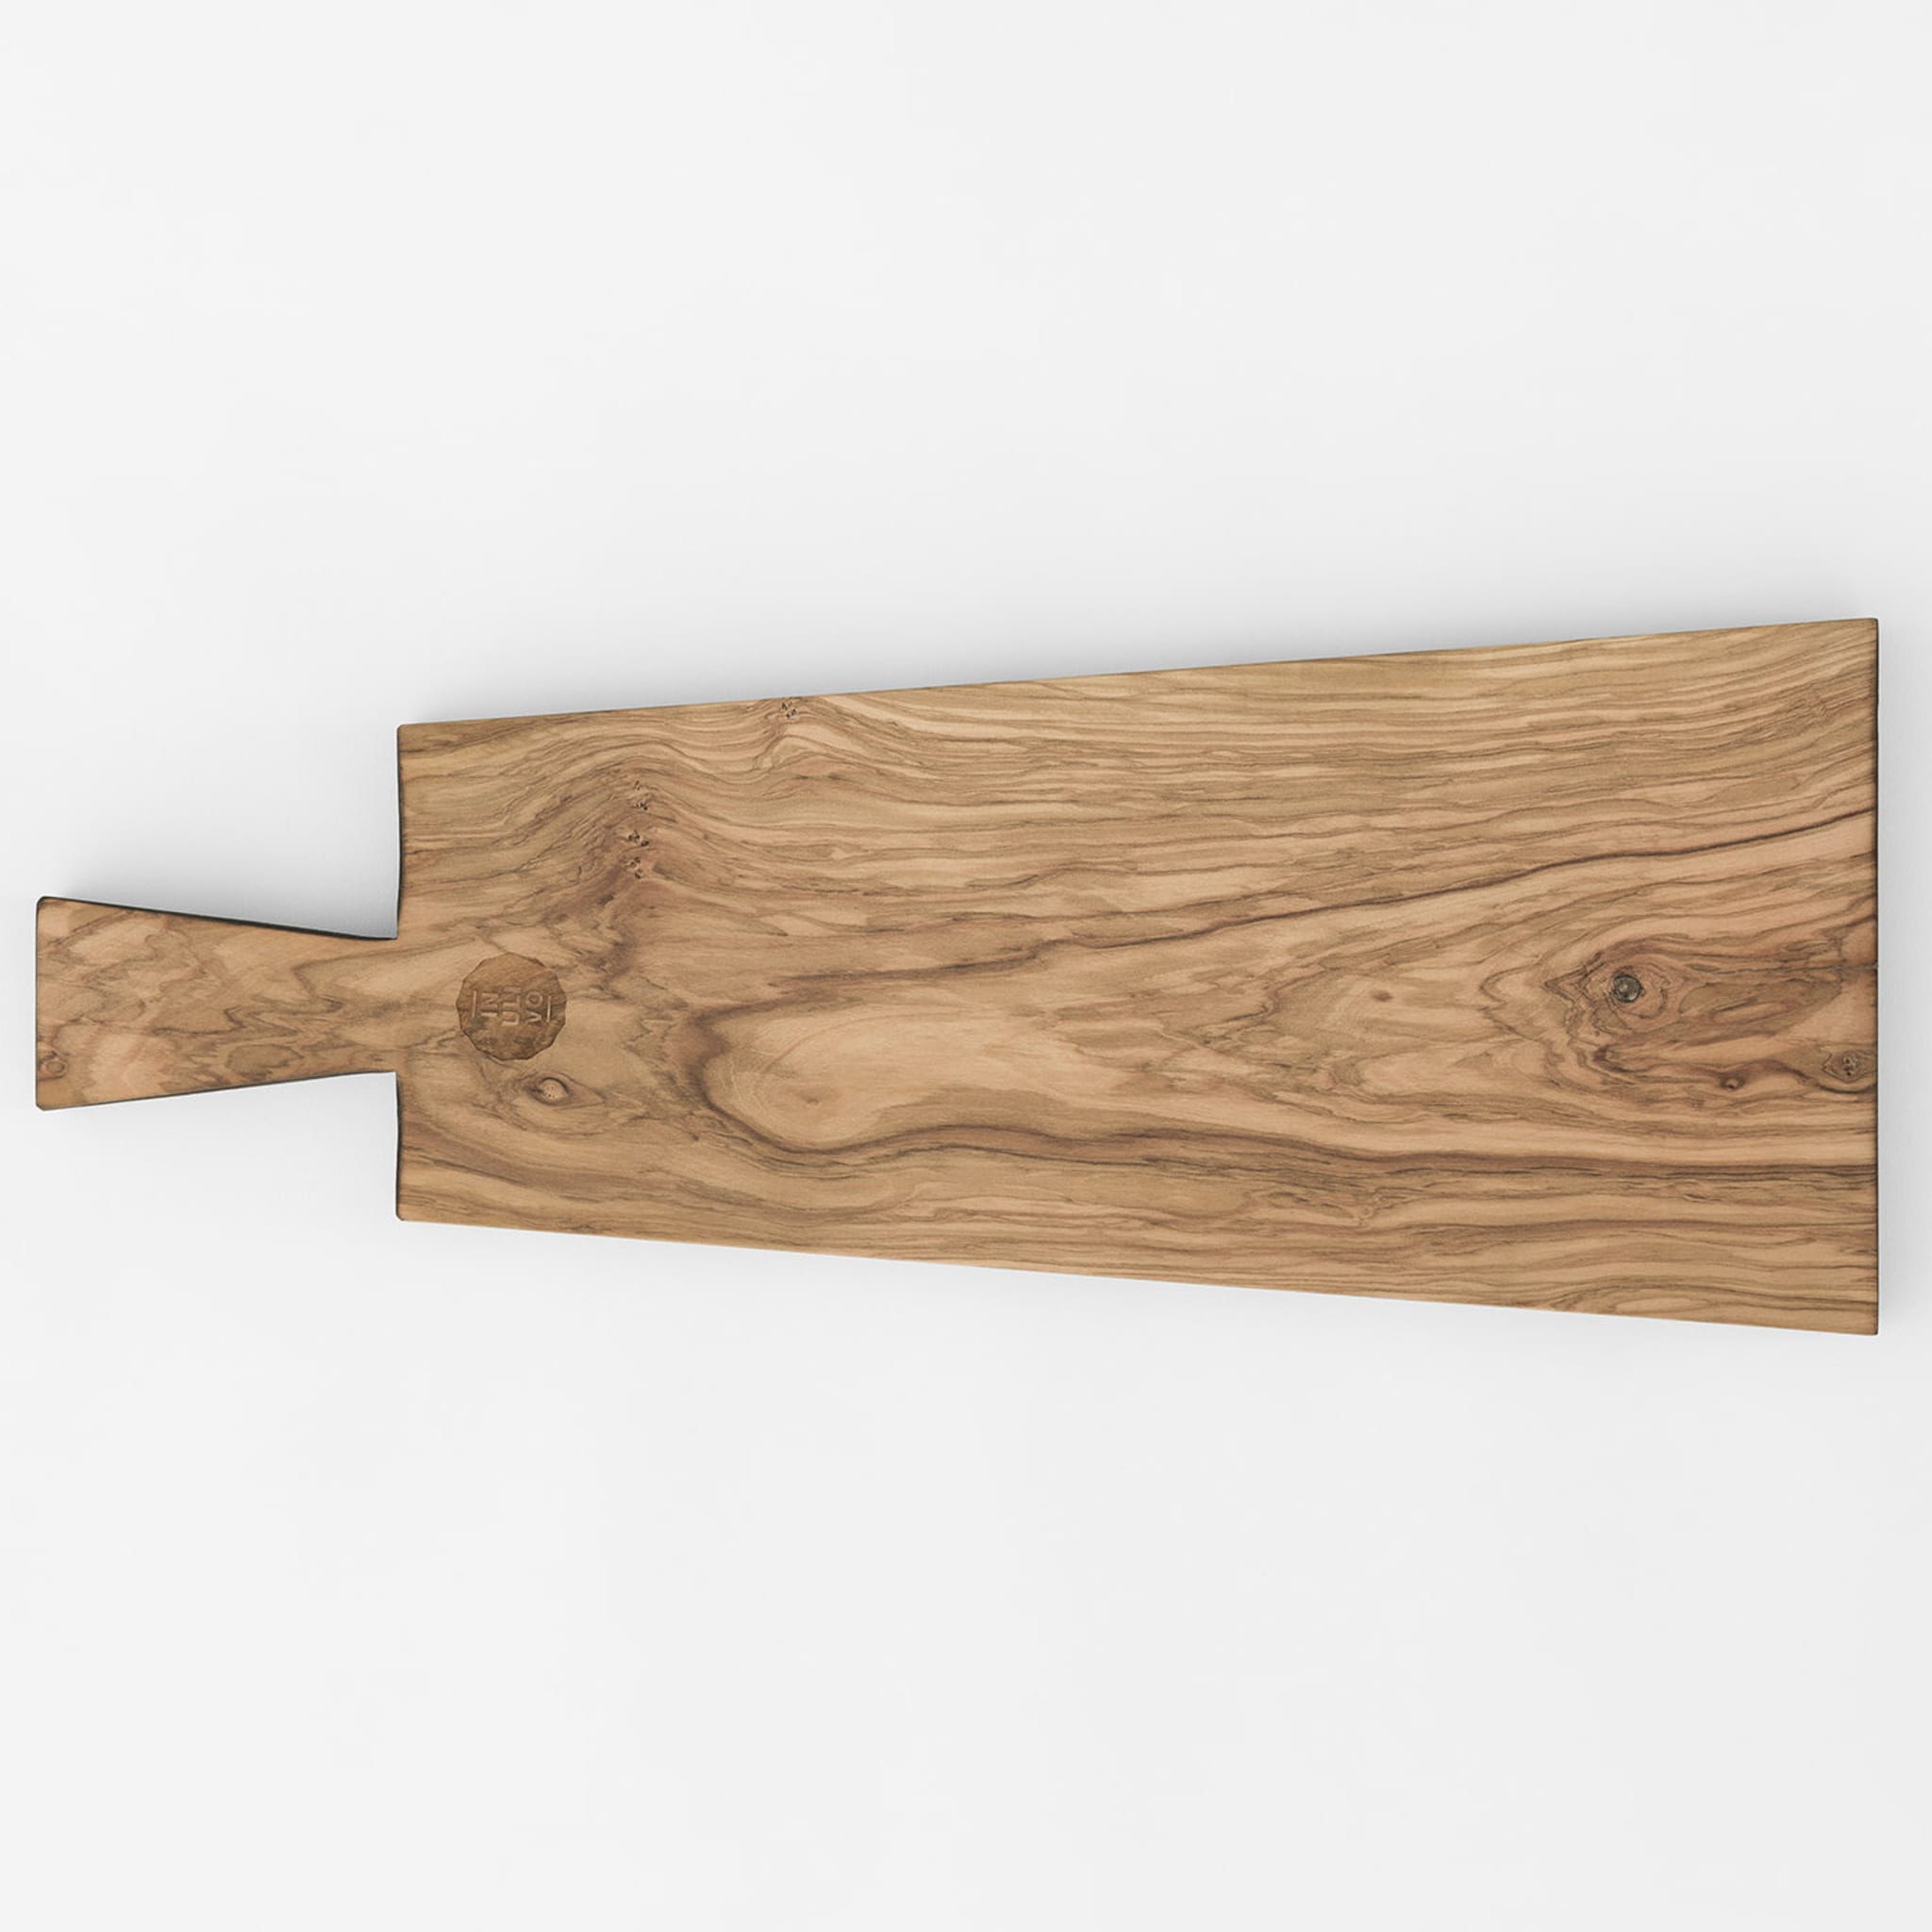 Inulivo Long Wood Chopping Board - Alternative view 1